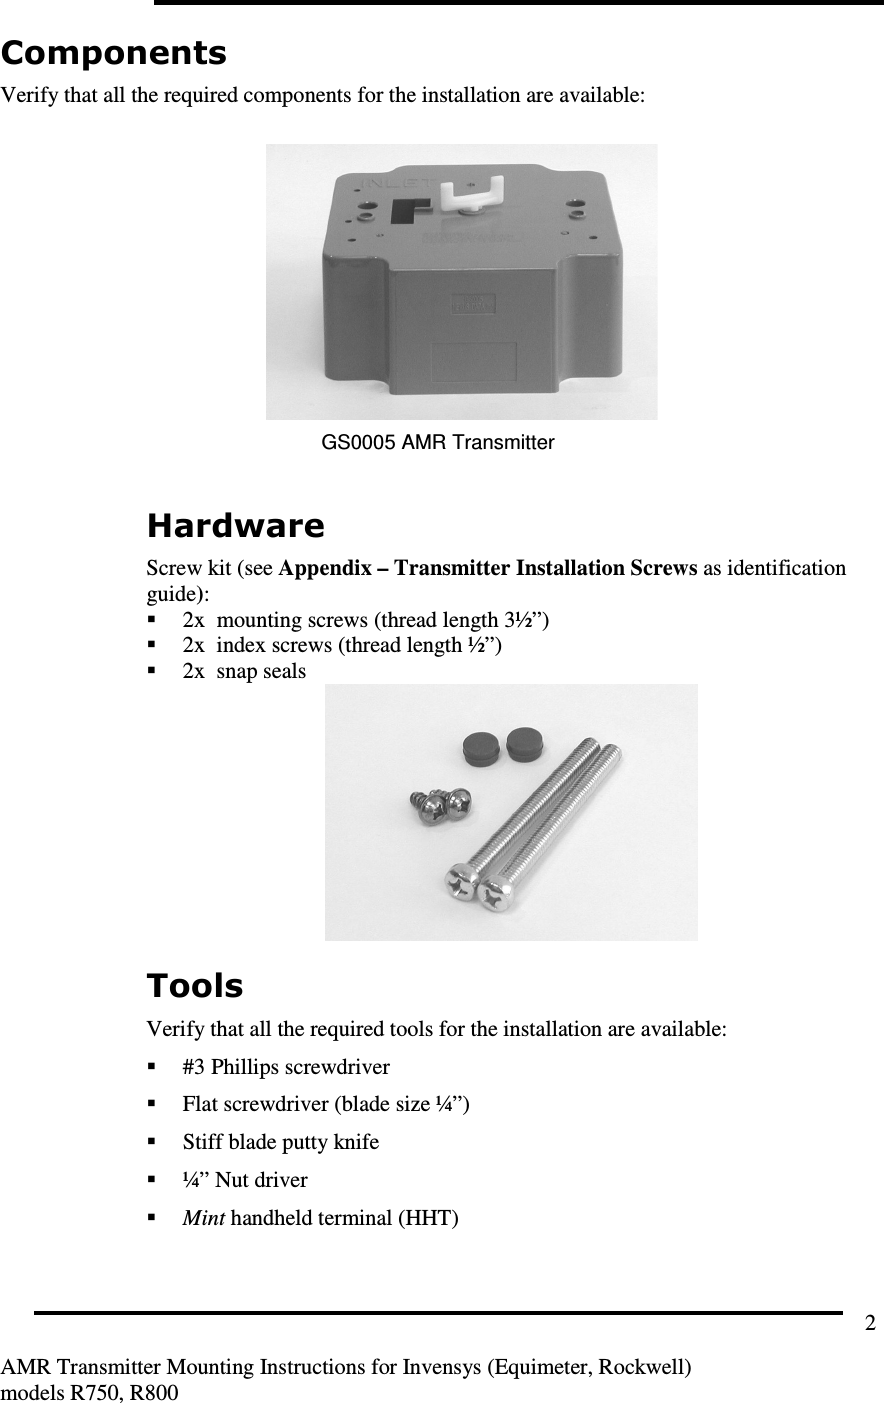         AMR Transmitter Mounting Instructions for Invensys (Equimeter, Rockwell) models R750, R800 2 Components Verify that all the required components for the installation are available:  GS0005 AMR Transmitter  Hardware Screw kit (see Appendix – Transmitter Installation Screws as identification guide):  2x  mounting screws (thread length 3½”)  2x  index screws (thread length ½”)  2x  snap seals  Tools Verify that all the required tools for the installation are available:  #3 Phillips screwdriver  Flat screwdriver (blade size ¼”)  Stiff blade putty knife  ¼” Nut driver  Mint handheld terminal (HHT)  